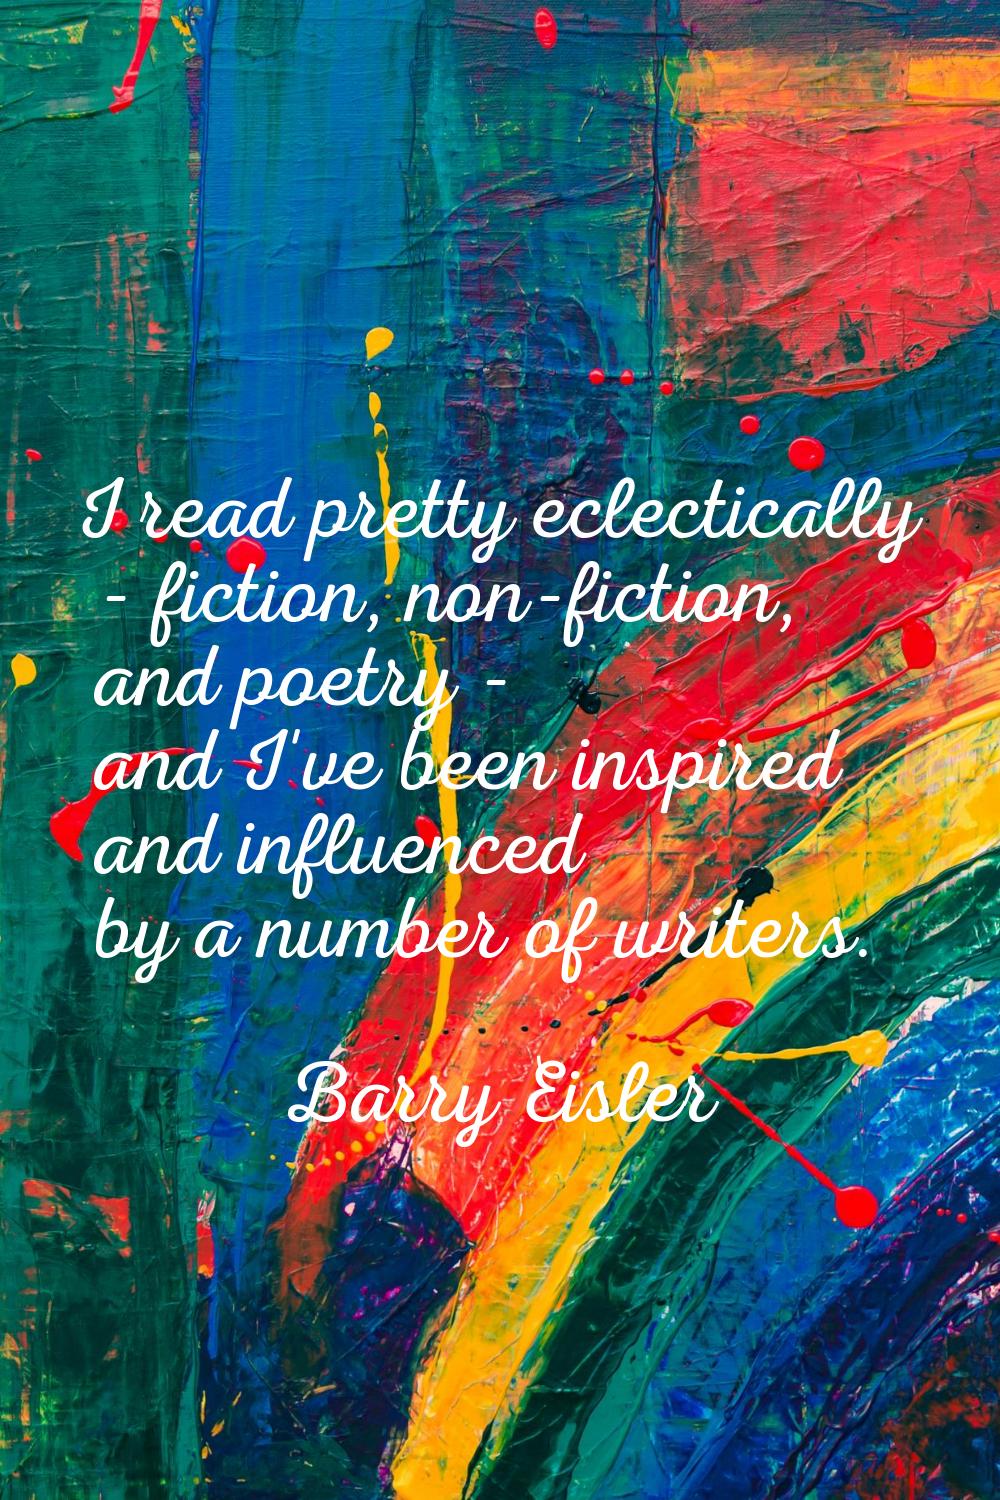 I read pretty eclectically - fiction, non-fiction, and poetry - and I've been inspired and influenc